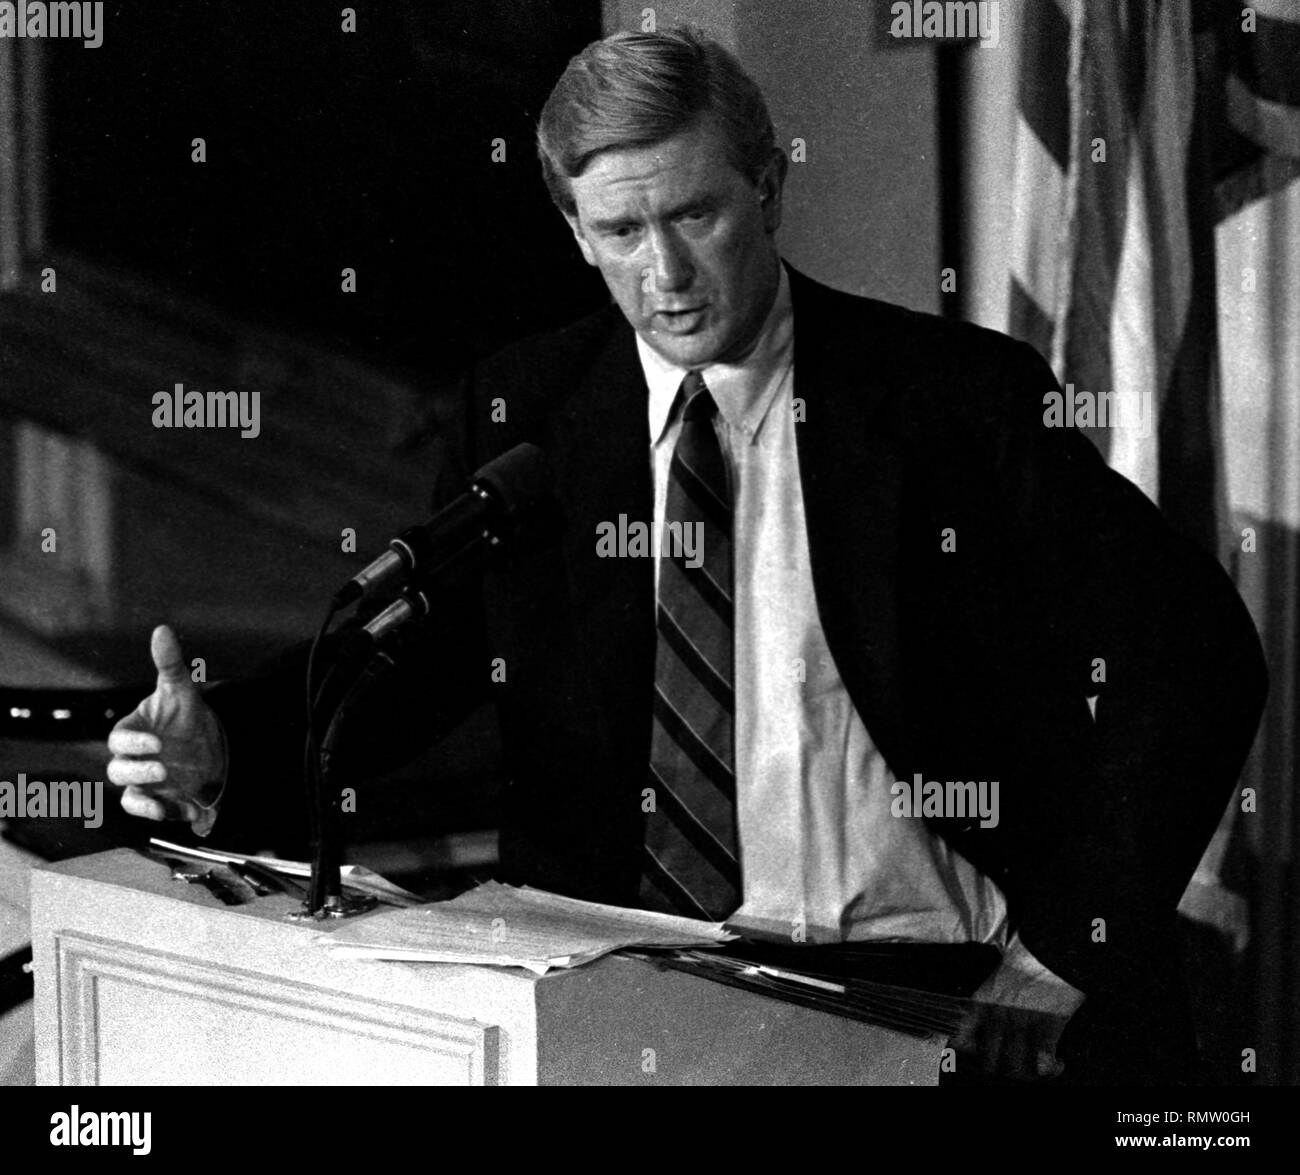 Former Massachusetts Governor Bill Weld announced he will run against President Donald Trump for the Republican Presidential nomination in 2020, Weld in this image was photographed during a Massachusetts gubernatorial debate in Boston Ma USA photo by Bill Belknap 1995 Stock Photo